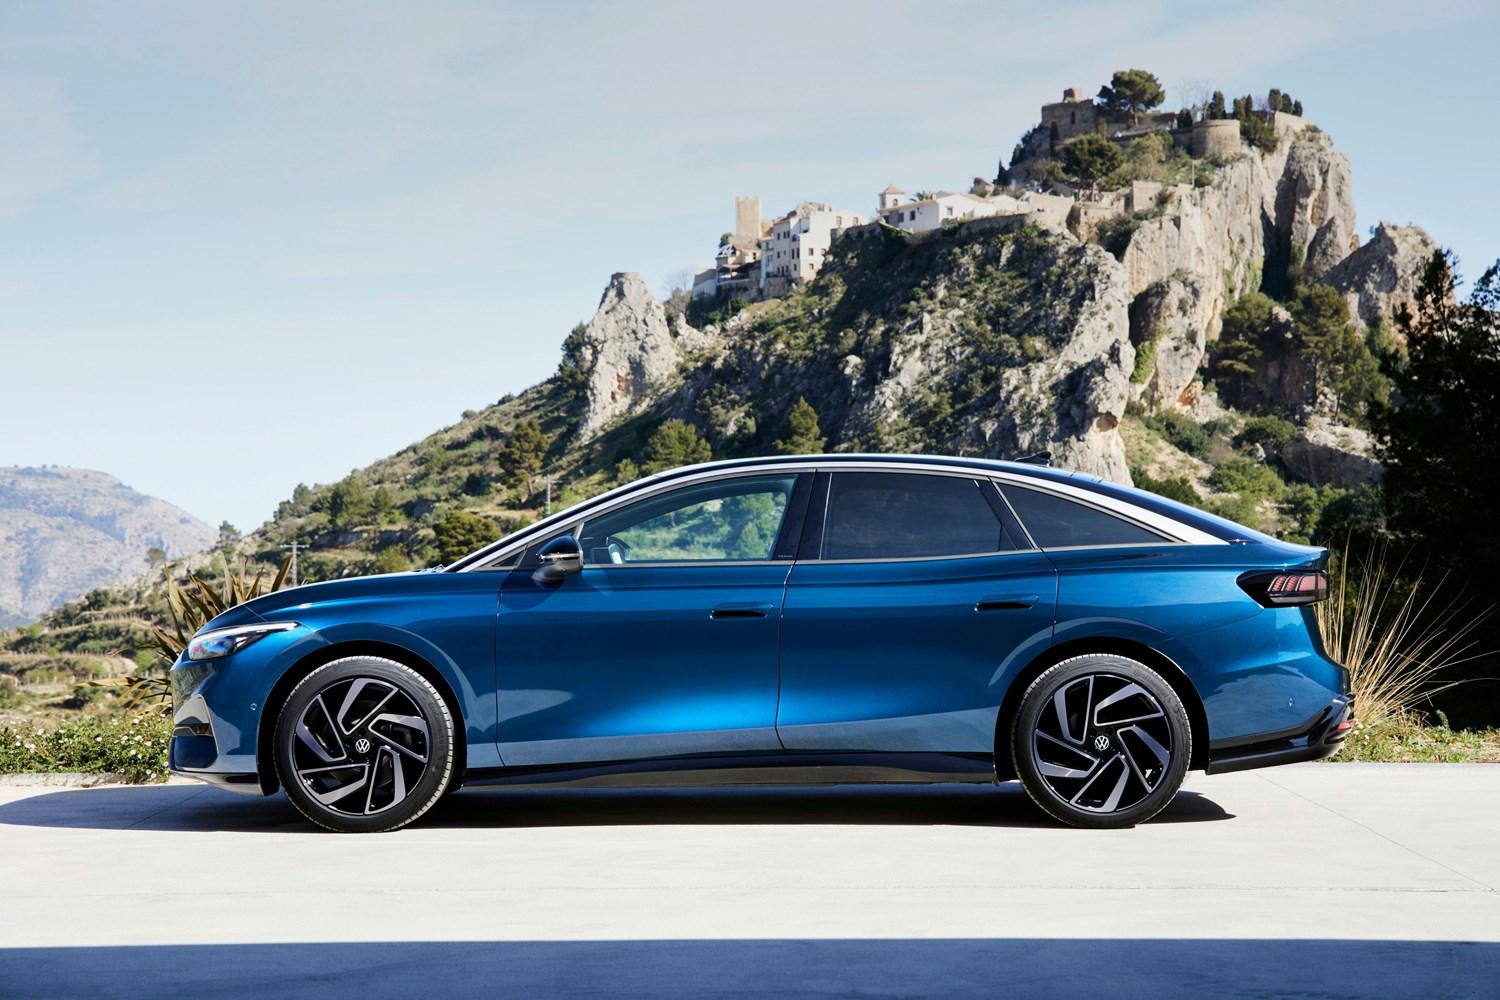 Side view of the new Volkswagen ID.7 in blue, parked with rocky hill behind